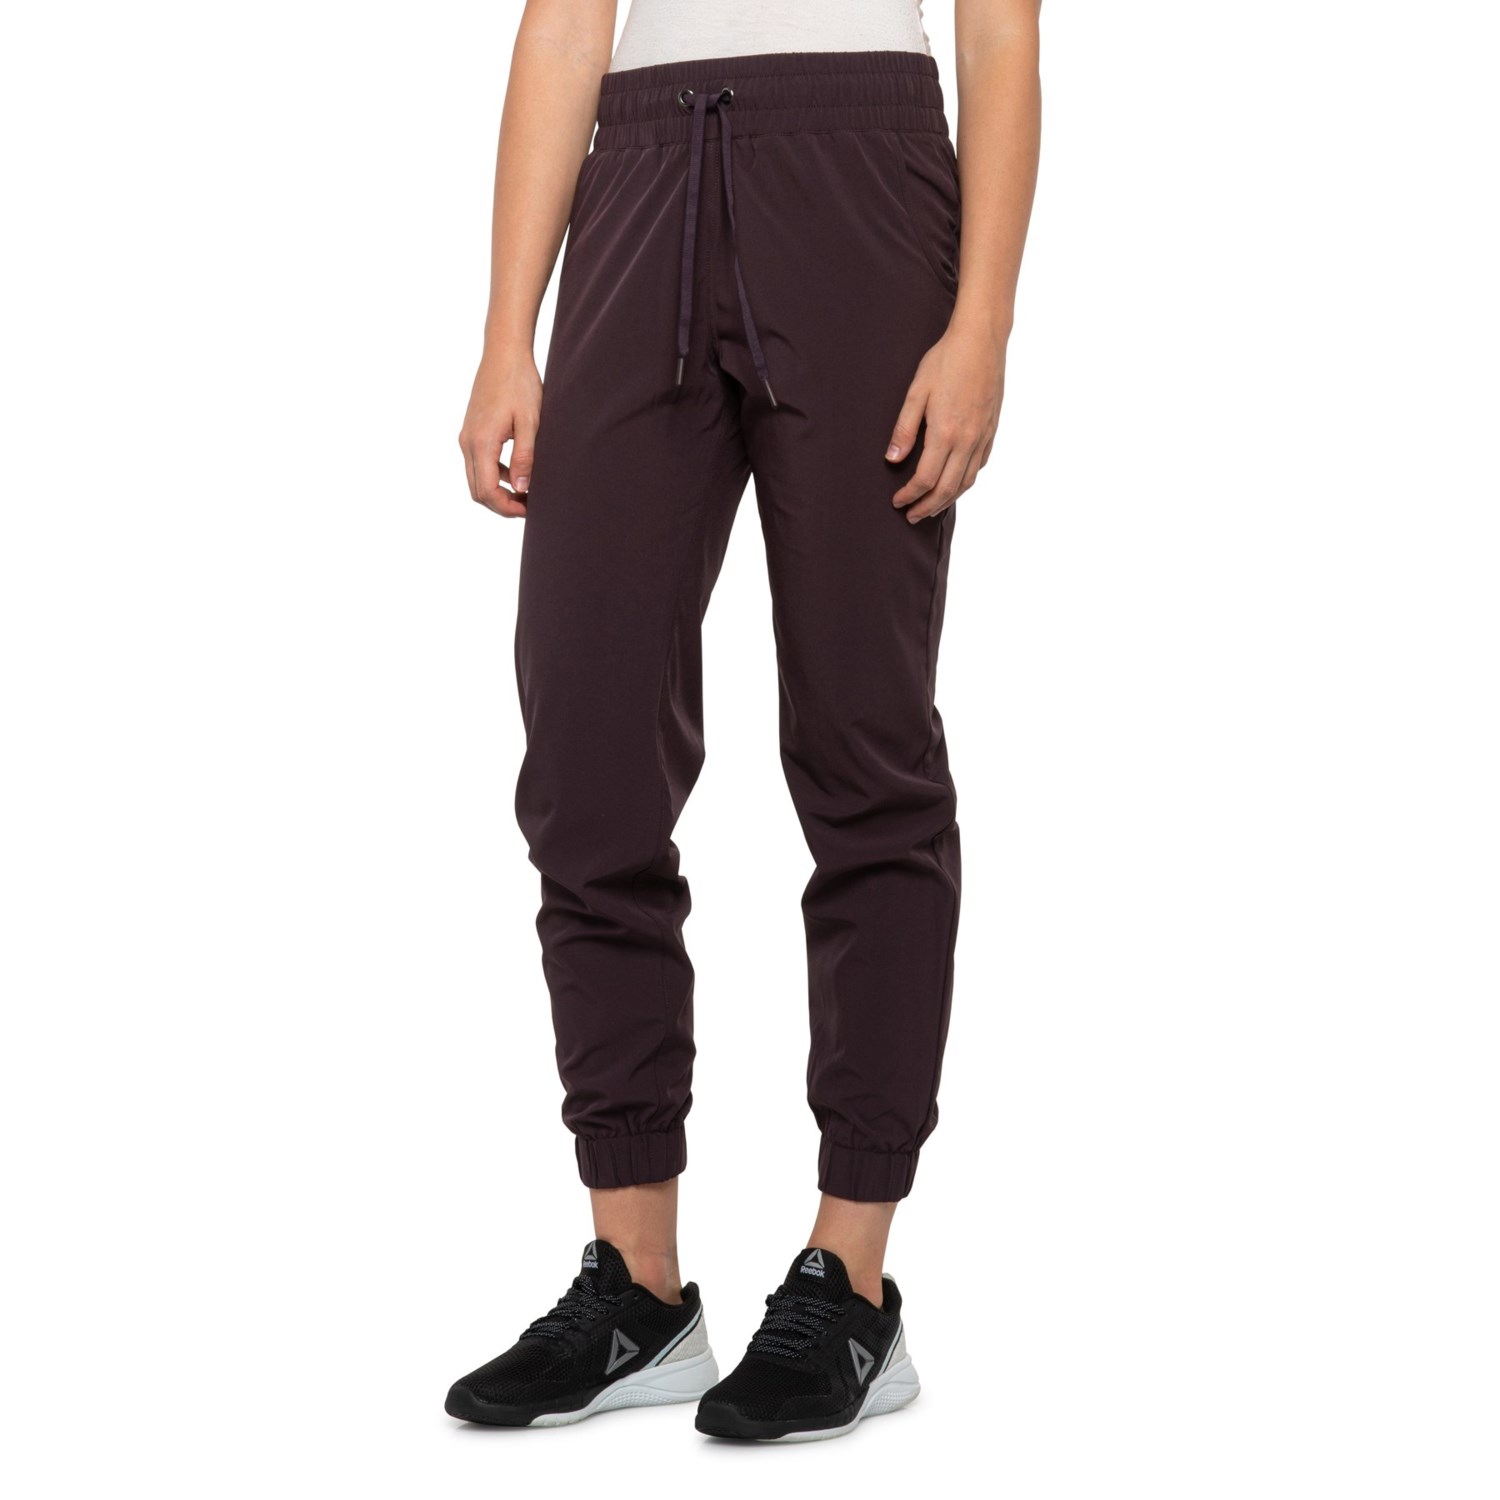 Kyodan Woven Joggers (For Women) - Save 44%